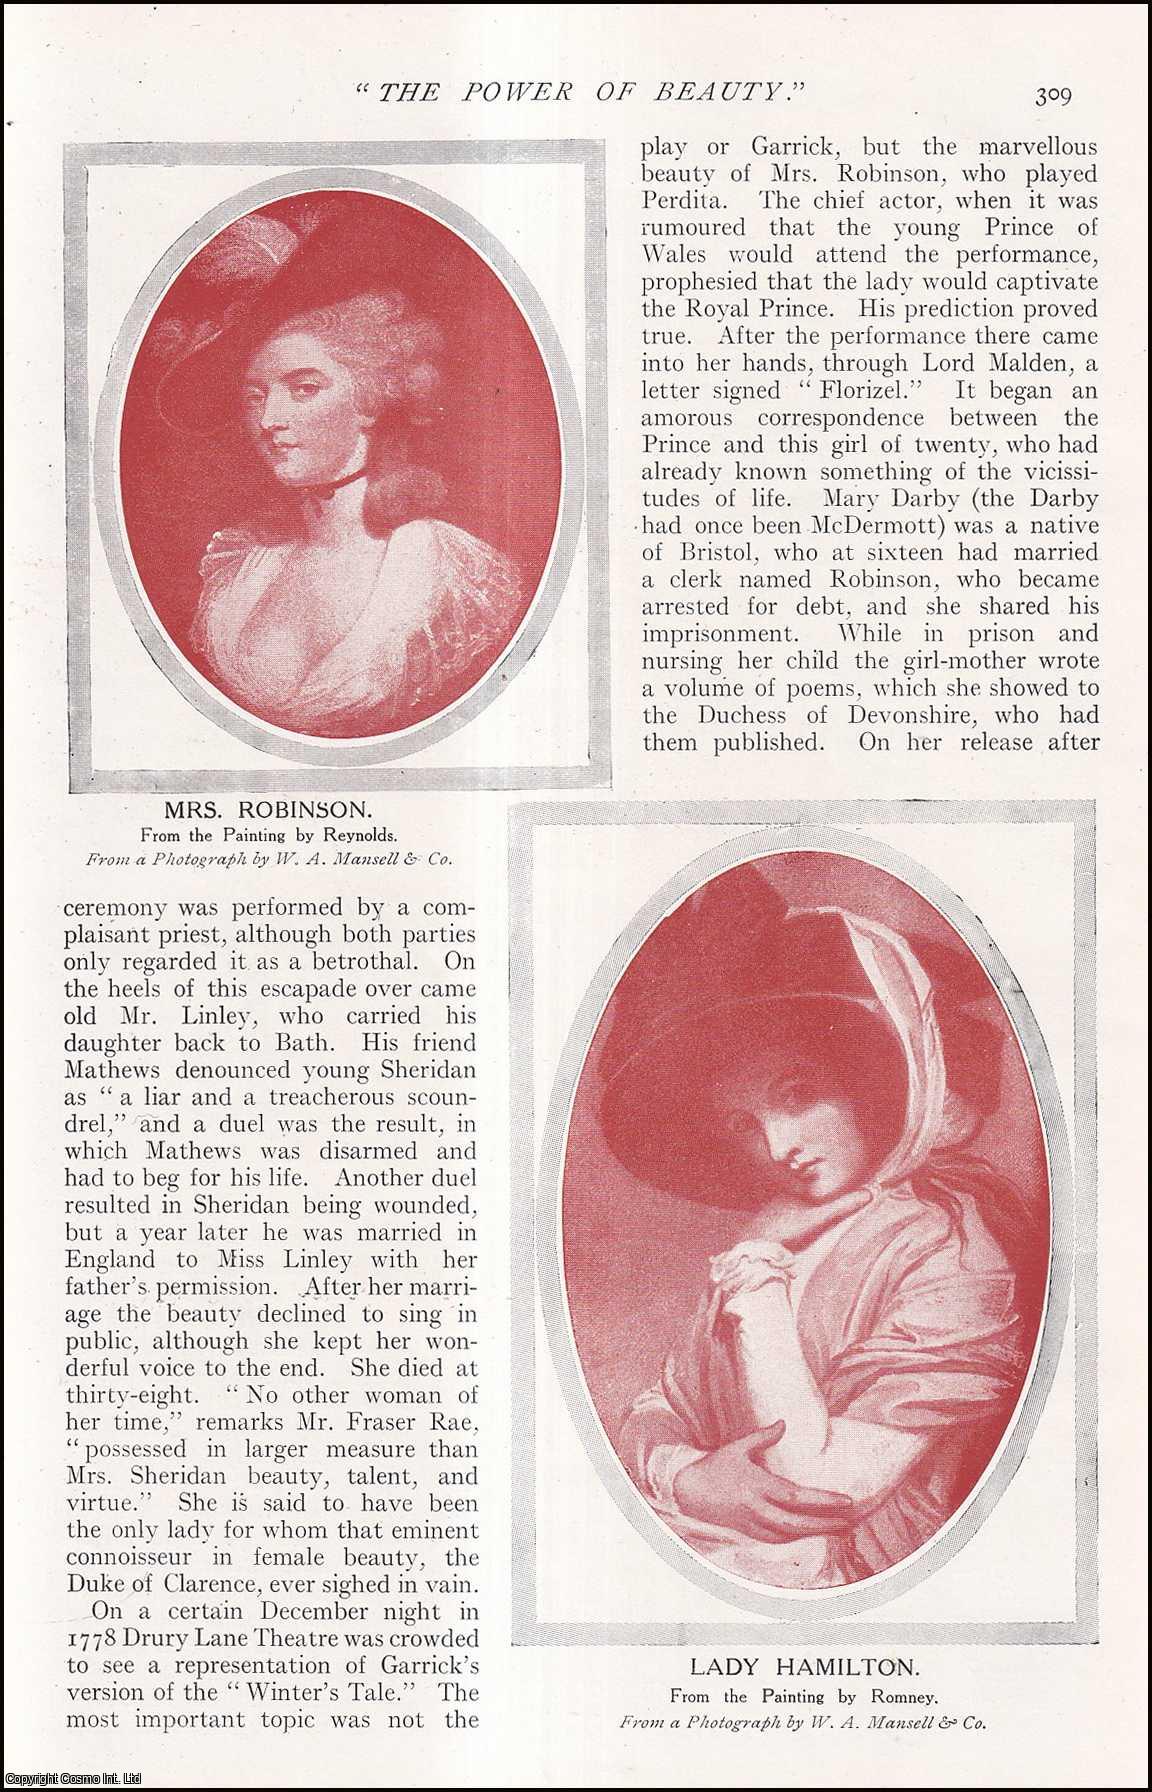 Seton Valentine - The Power of Beauty : Beautiful Women. The Countess of Grammont ; the Duchess of Hamilton ; Lady Coventry ; MME. De Pompadour & others. With portraits illustrated in colour. An uncommon original article from The Strand Magazine, 1911.